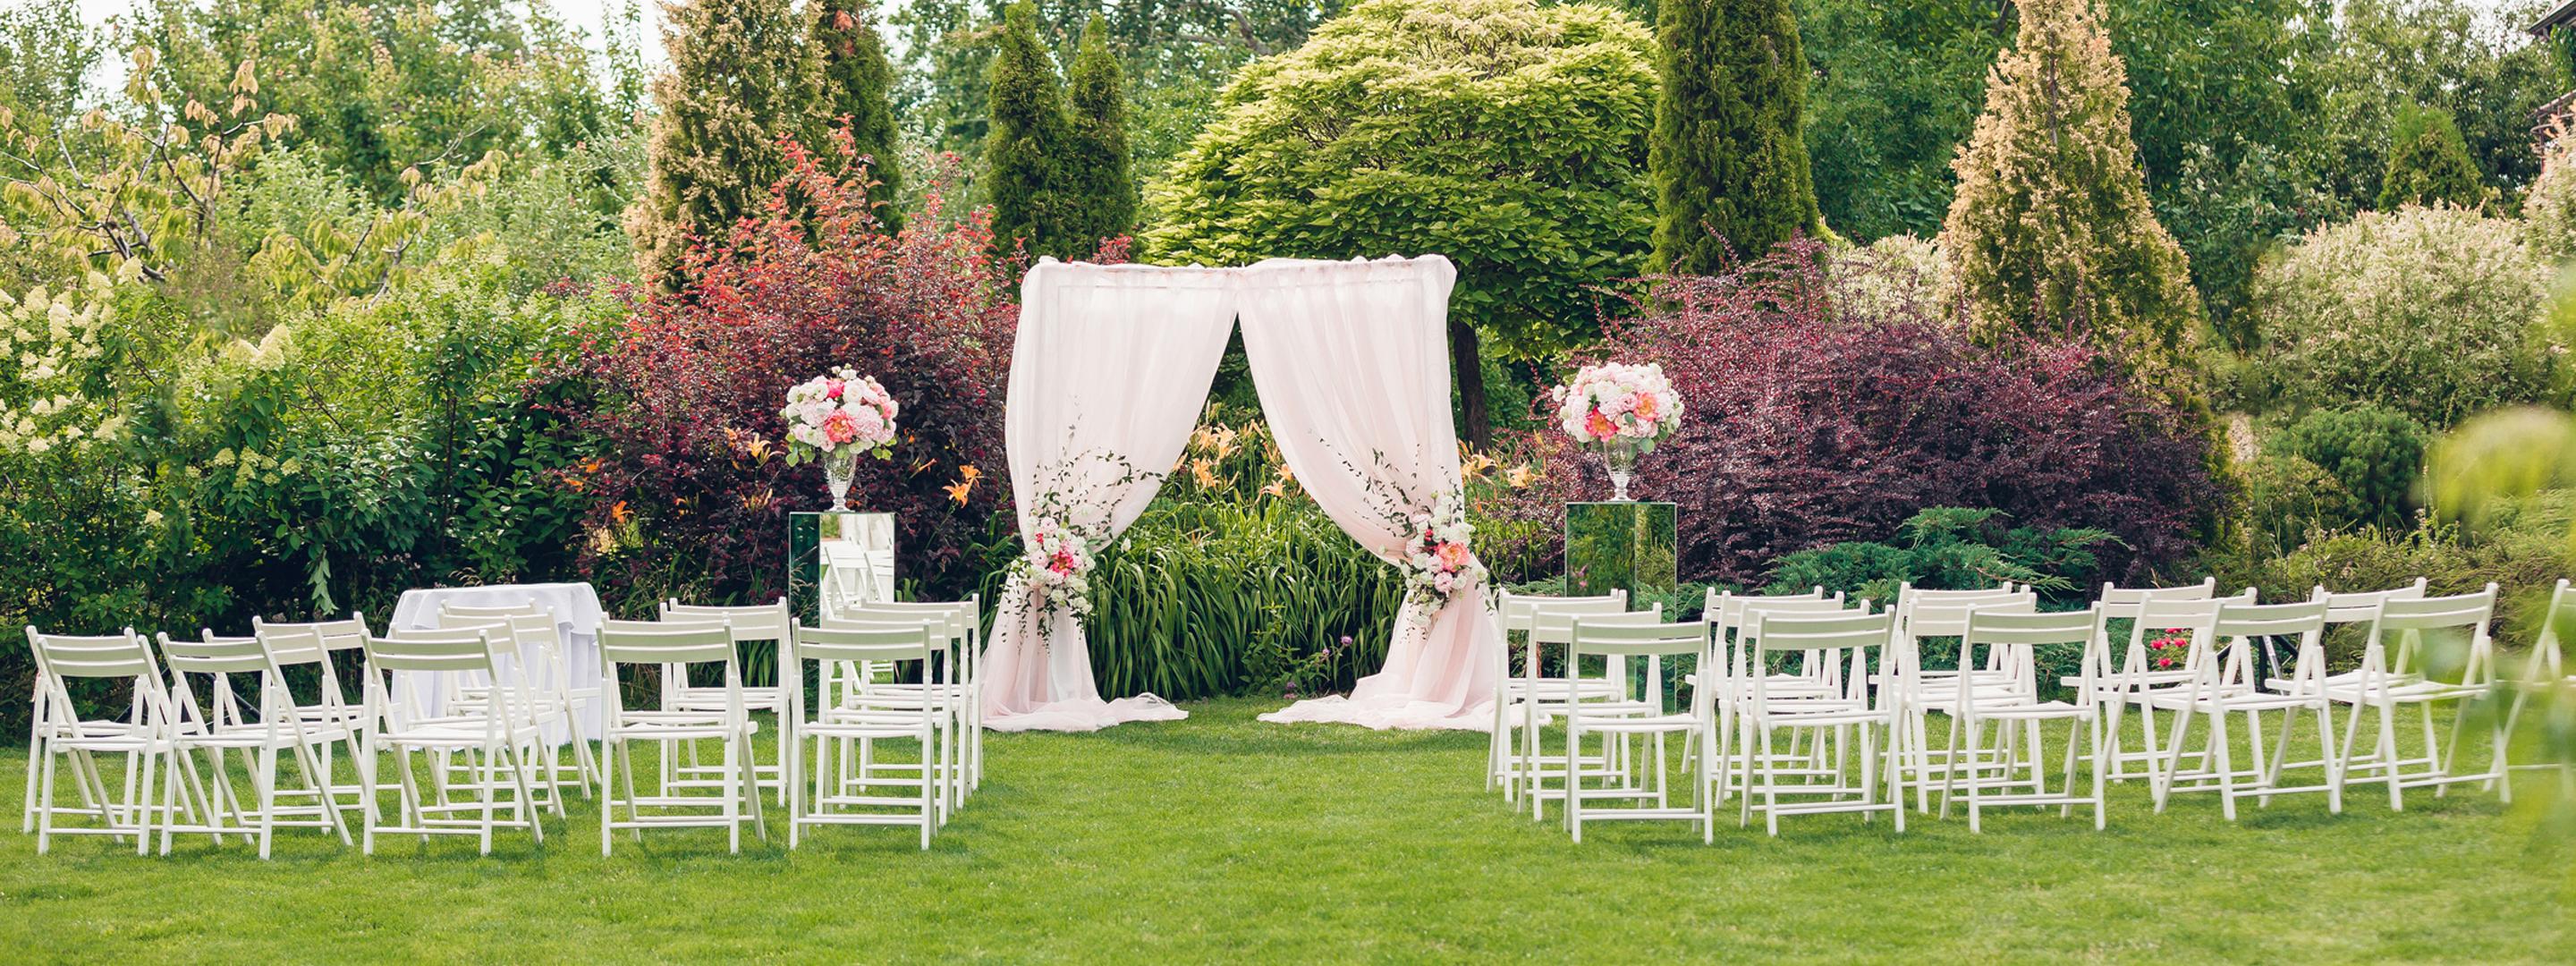 Outdoor wedding venue with chairs